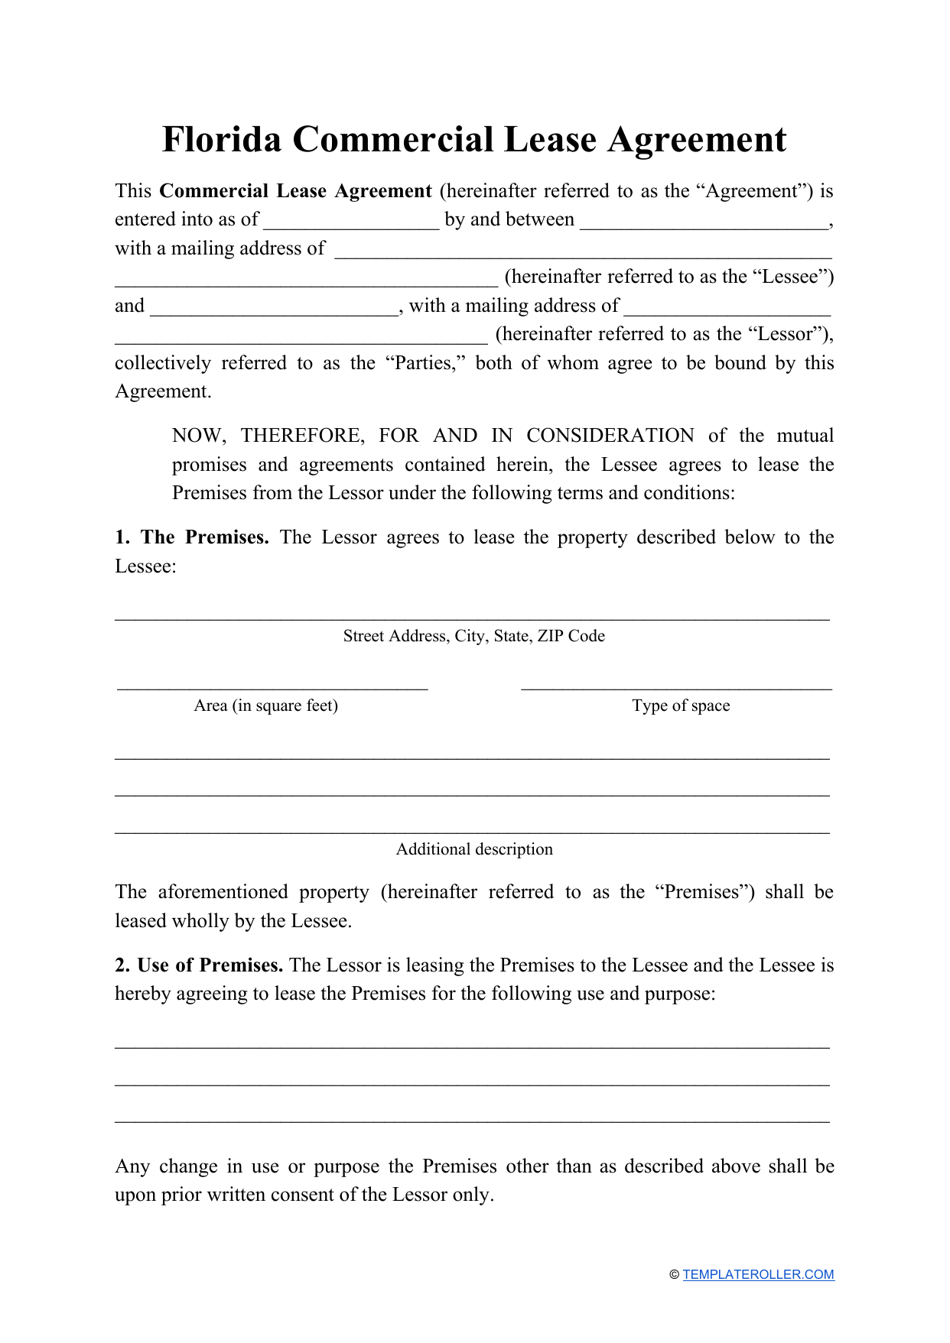 Commercial Lease Agreement Template - Florida, Page 1